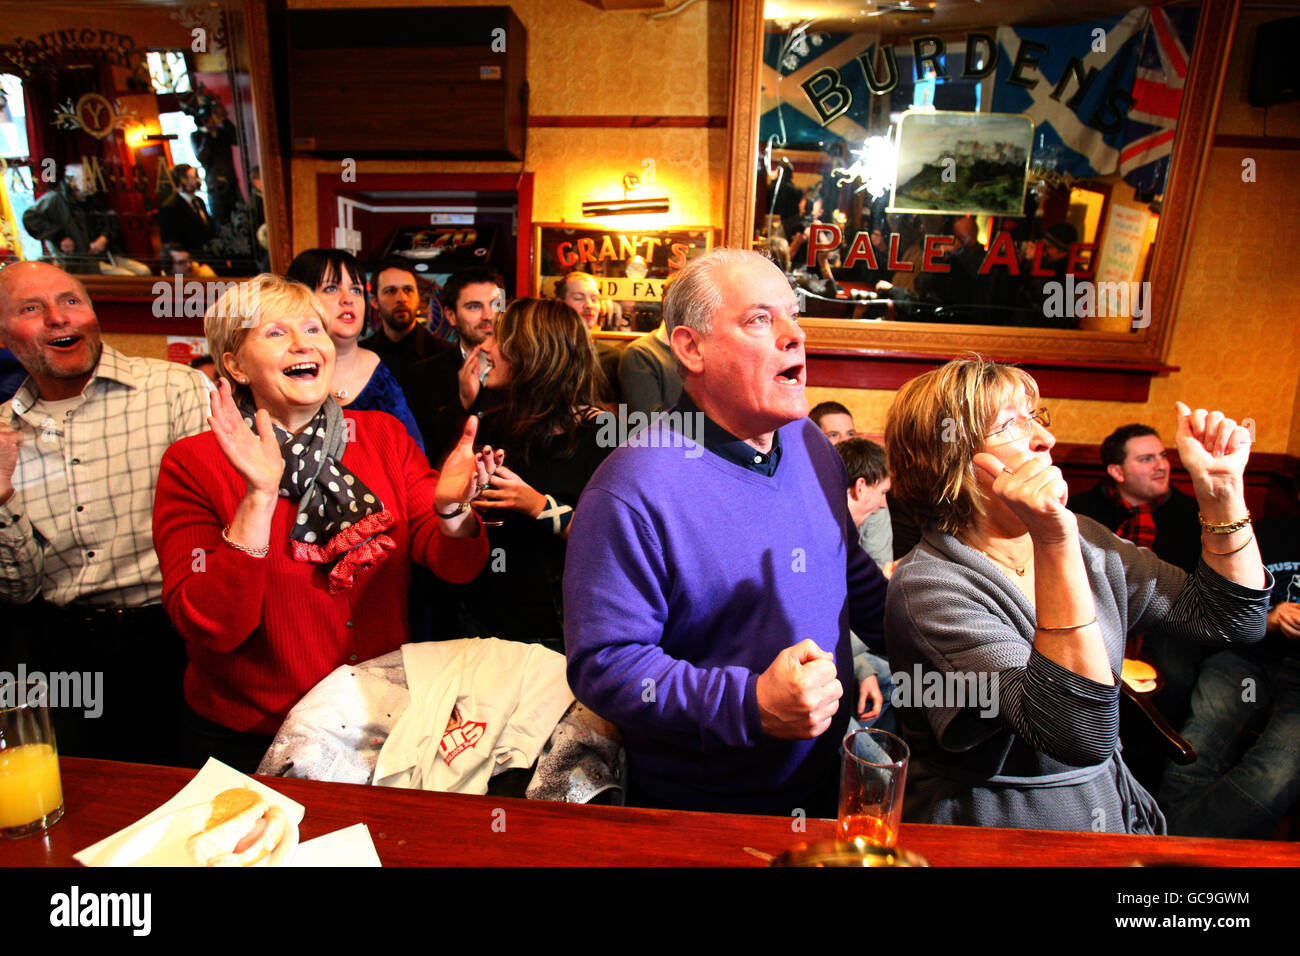 Andy Murray in Australian Open final. Andy Murray fans react as they watch him in the Australian Open final match against Roger Federer on TV in the Dunblane Hotel in Dunblane. Stock Photo